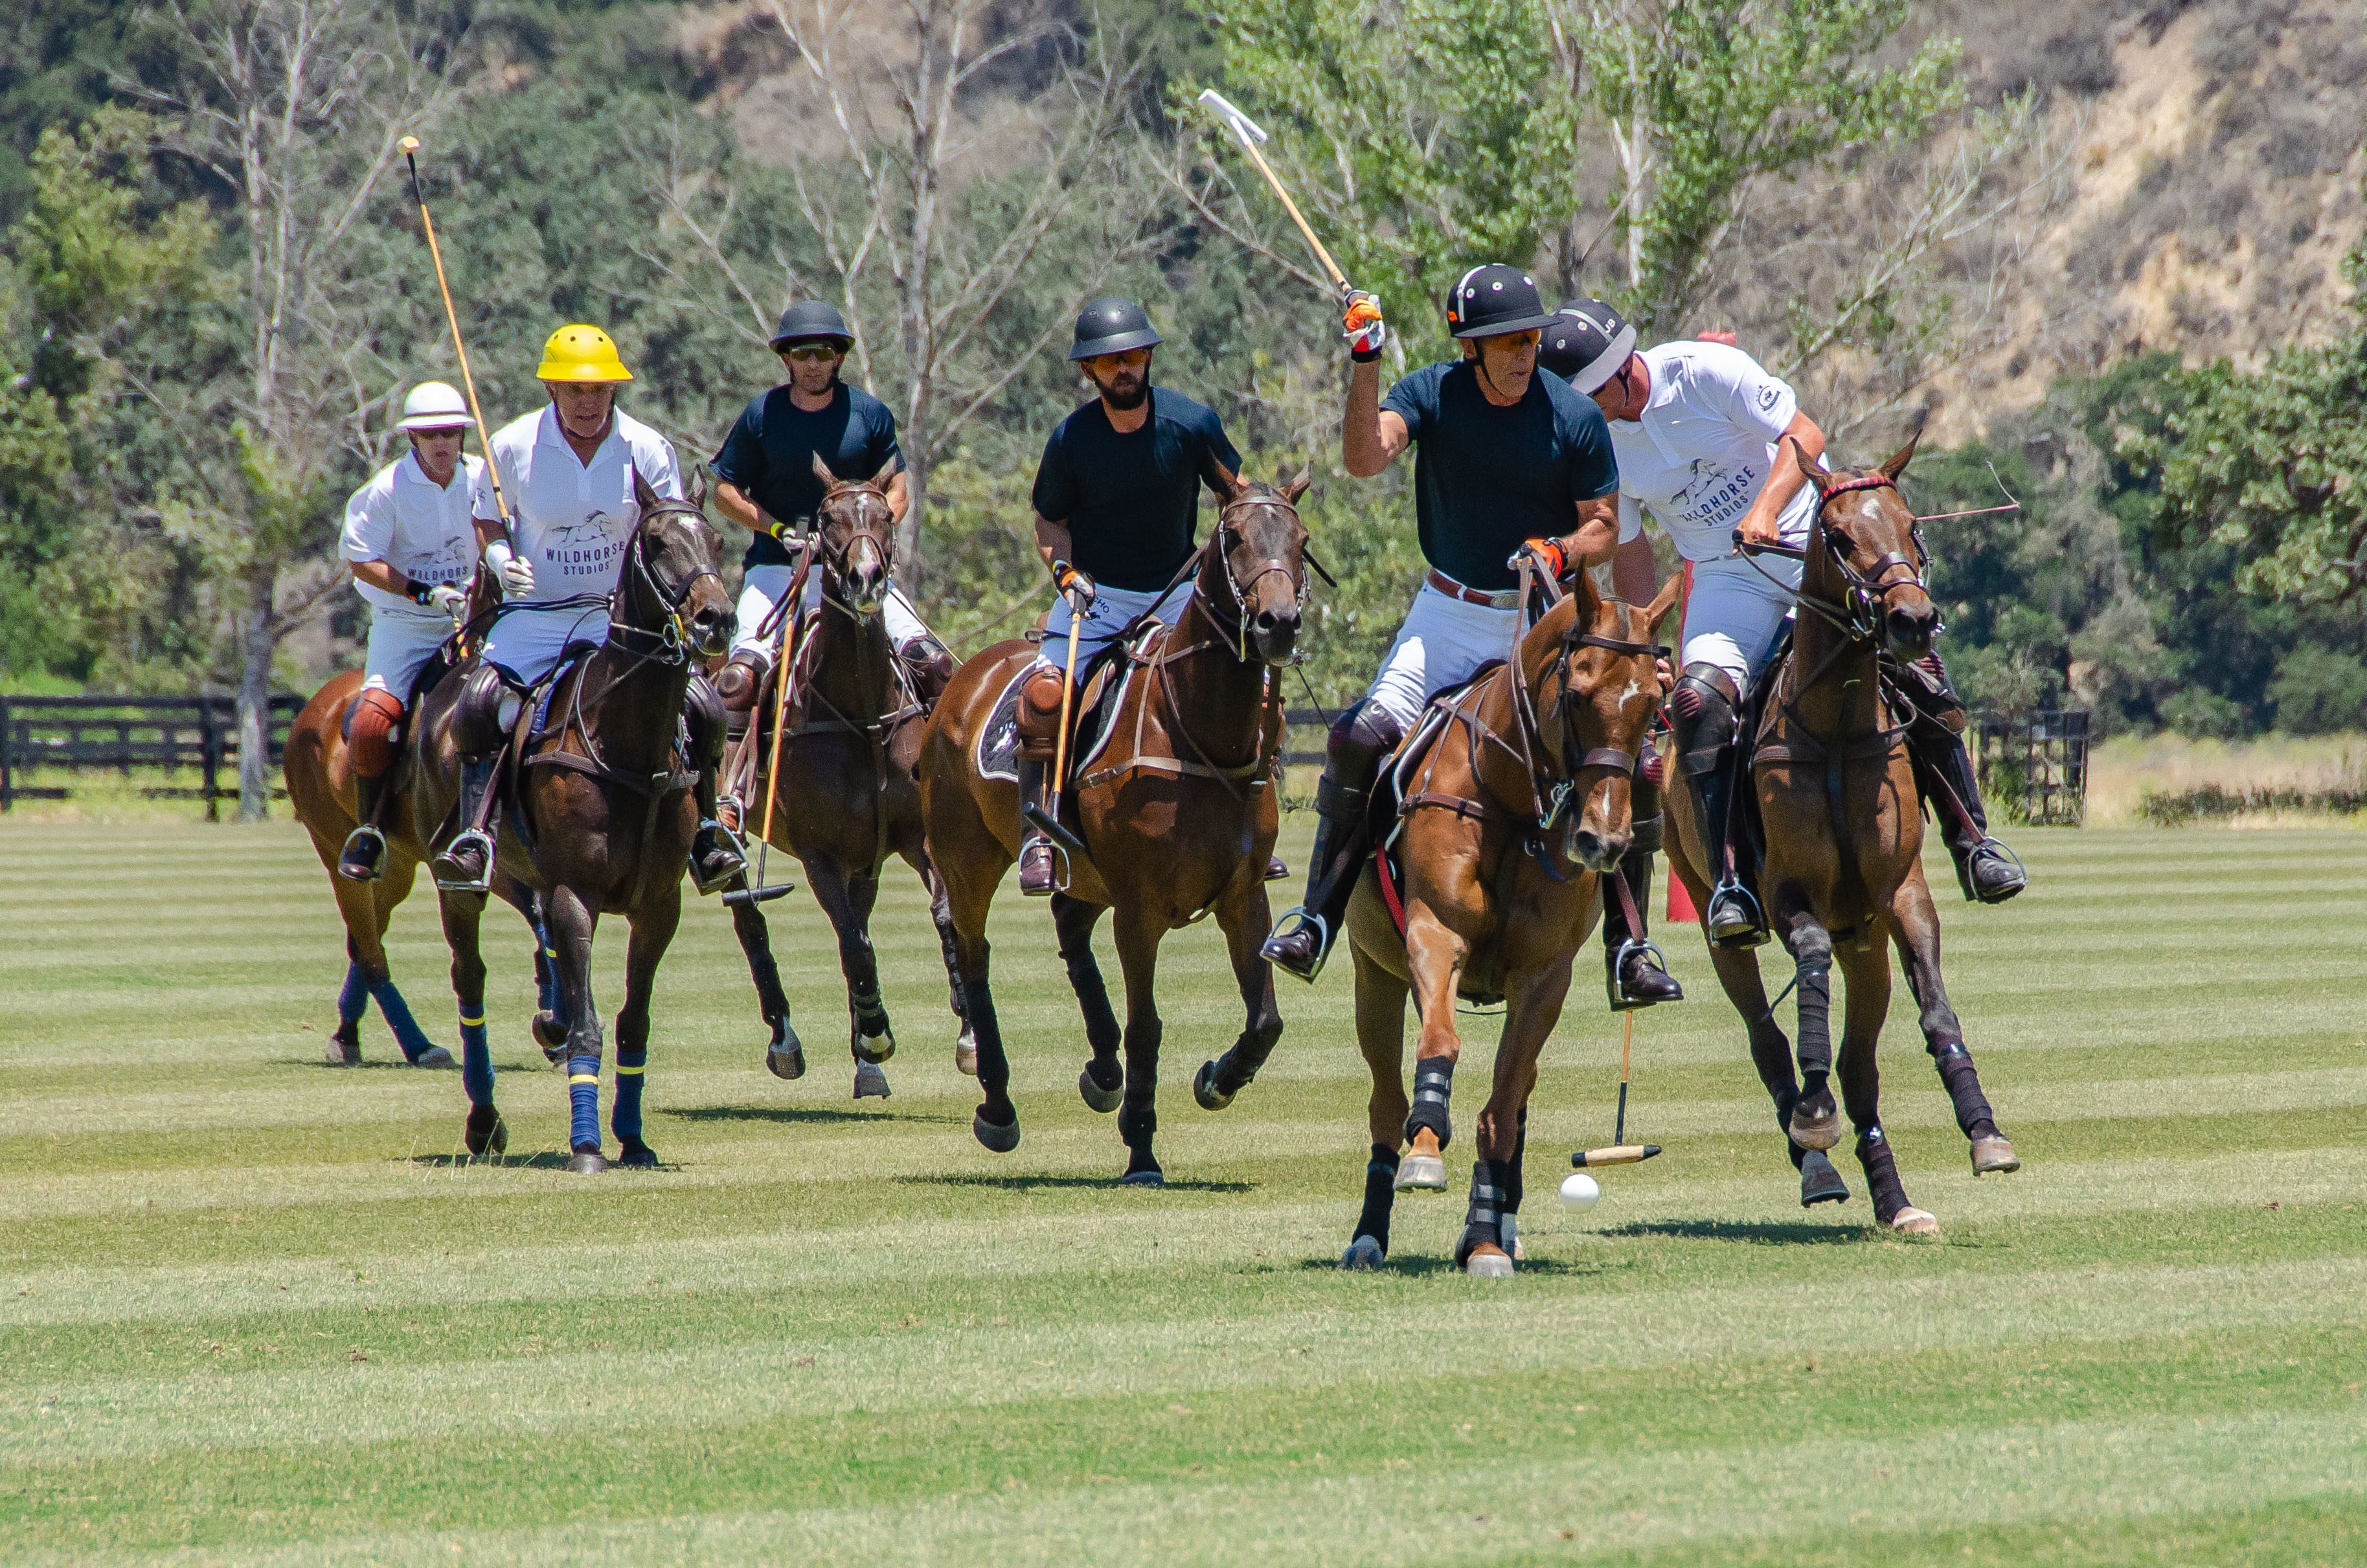 Figueras’ star burns brightly at annual Polo Classic